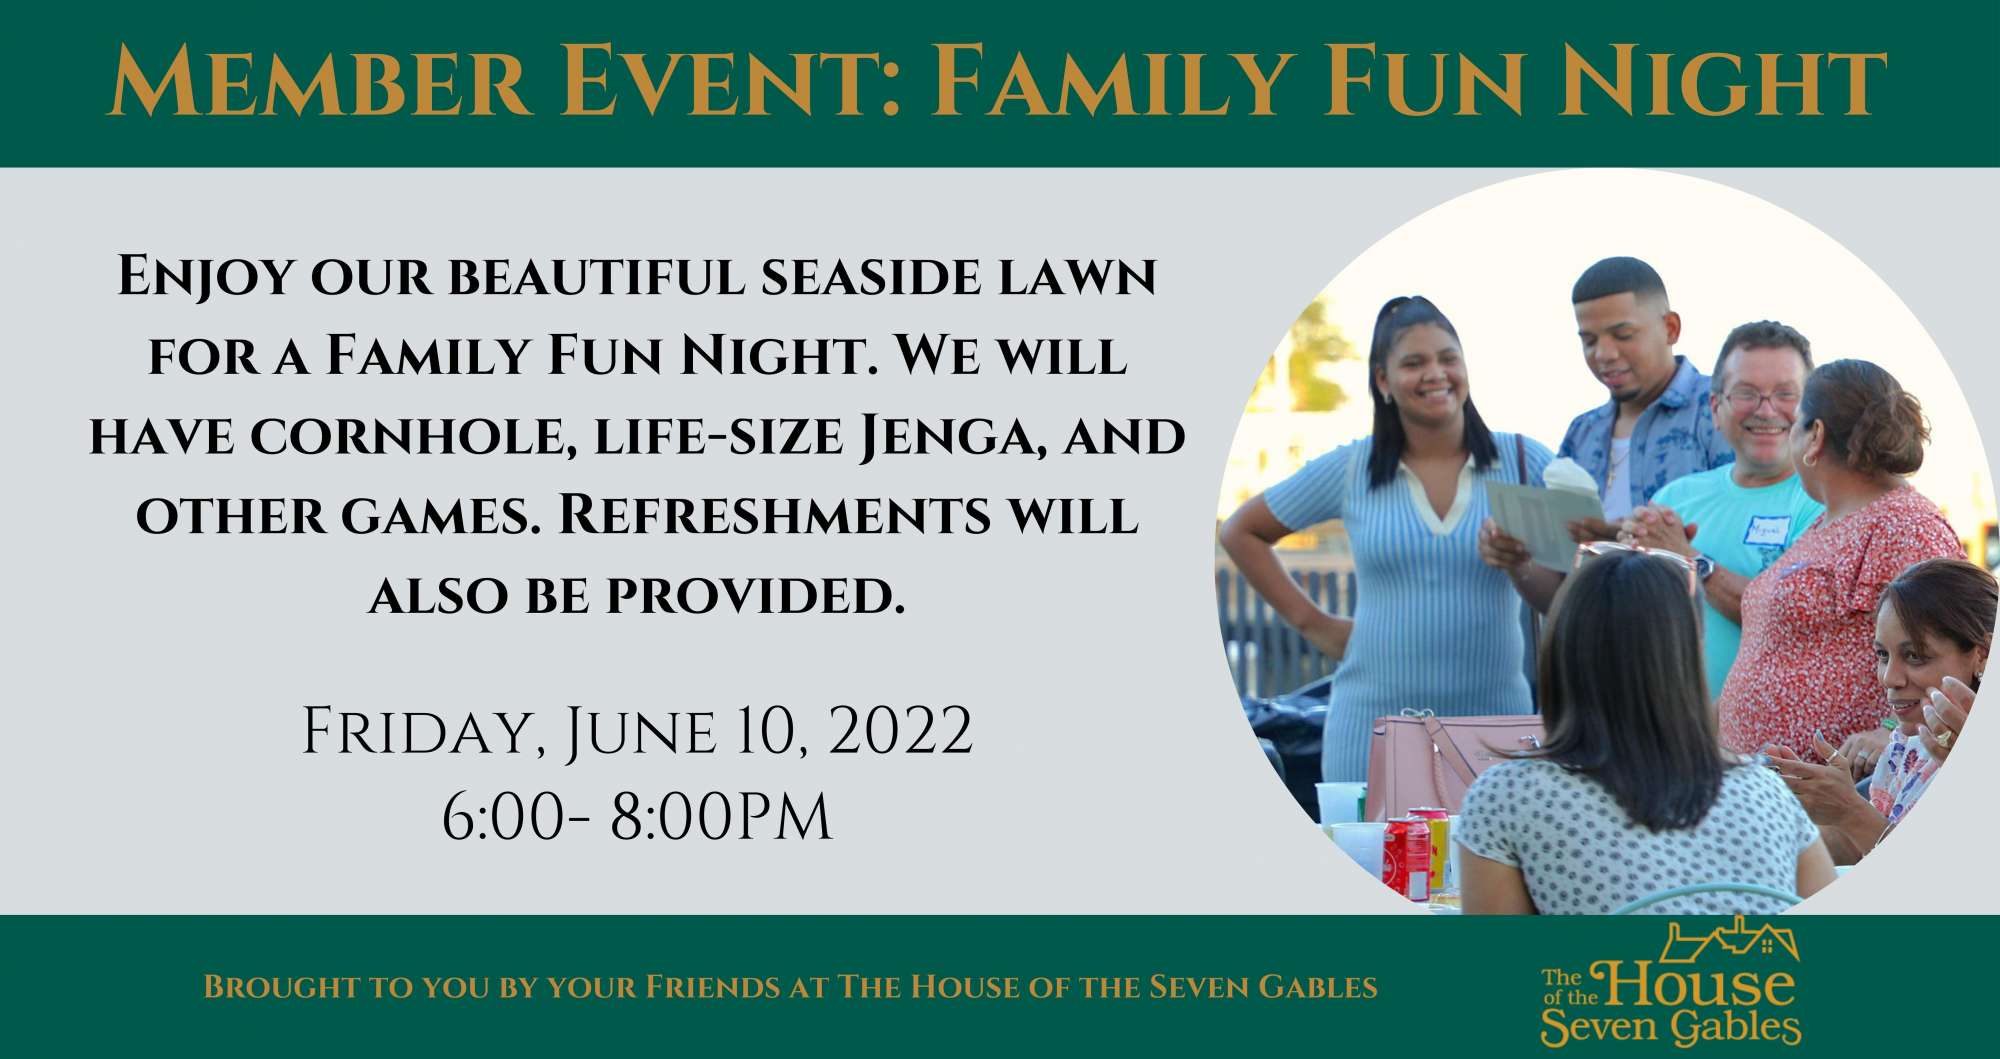 Member Event: Family Fun Night. Enjoy our beautiful seaside lawn for a Family Fun Night. We will have cornhole, life-size Jenga, and other games. Refreshments will also be provided. Friday, June 10, 2022 6:00-8:00 PM. Brought to you by your friends at The House of the Seven Gables.